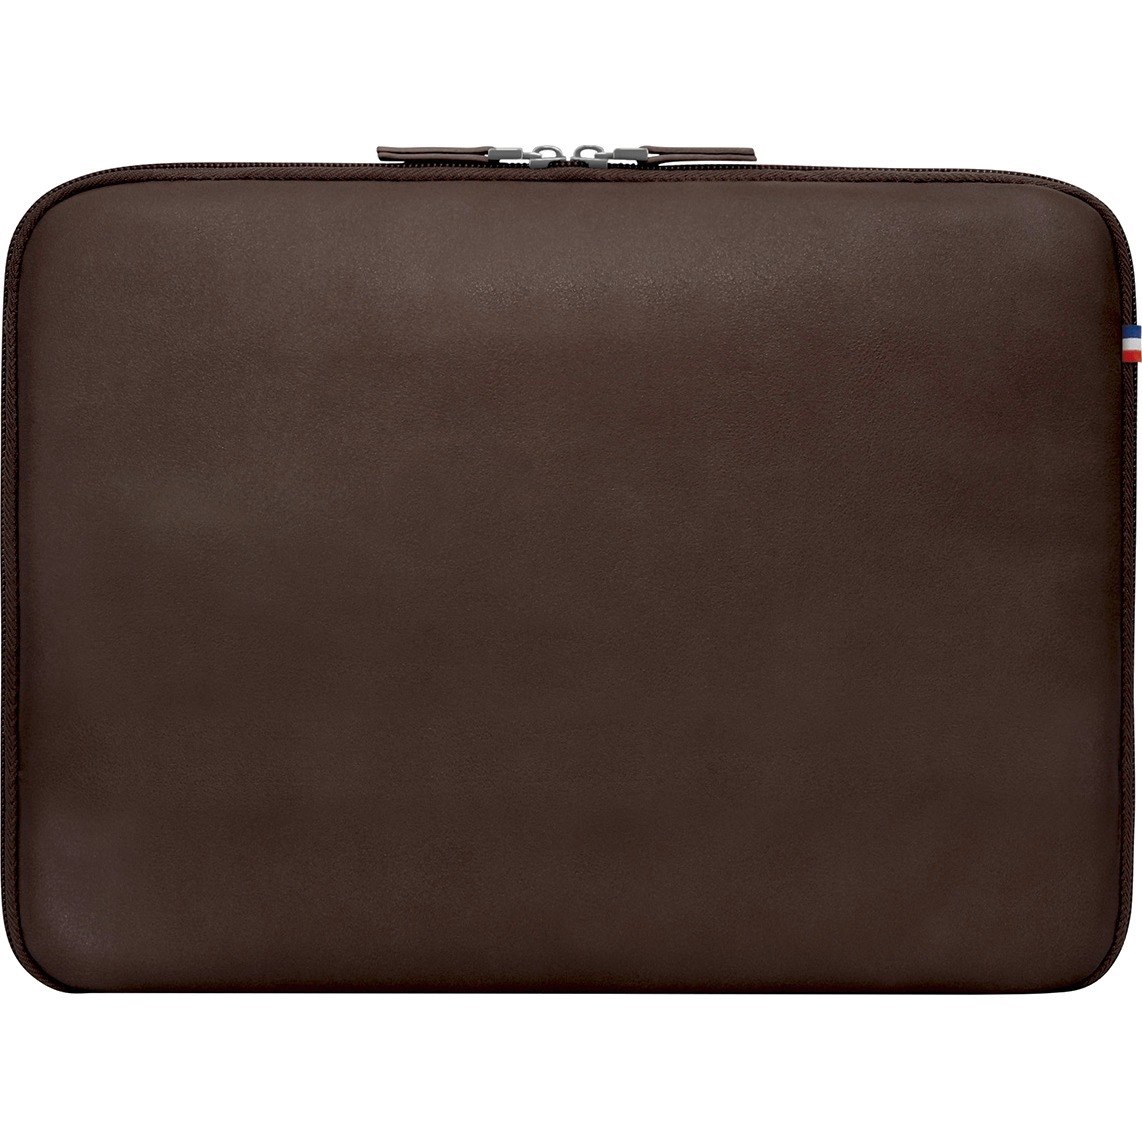 MOBILIS Origine Carrying Case (Sleeve) for 25.4 cm (10") to 31.8 cm (12.5") Apple MacBook, Notebook - Chocolate Brown